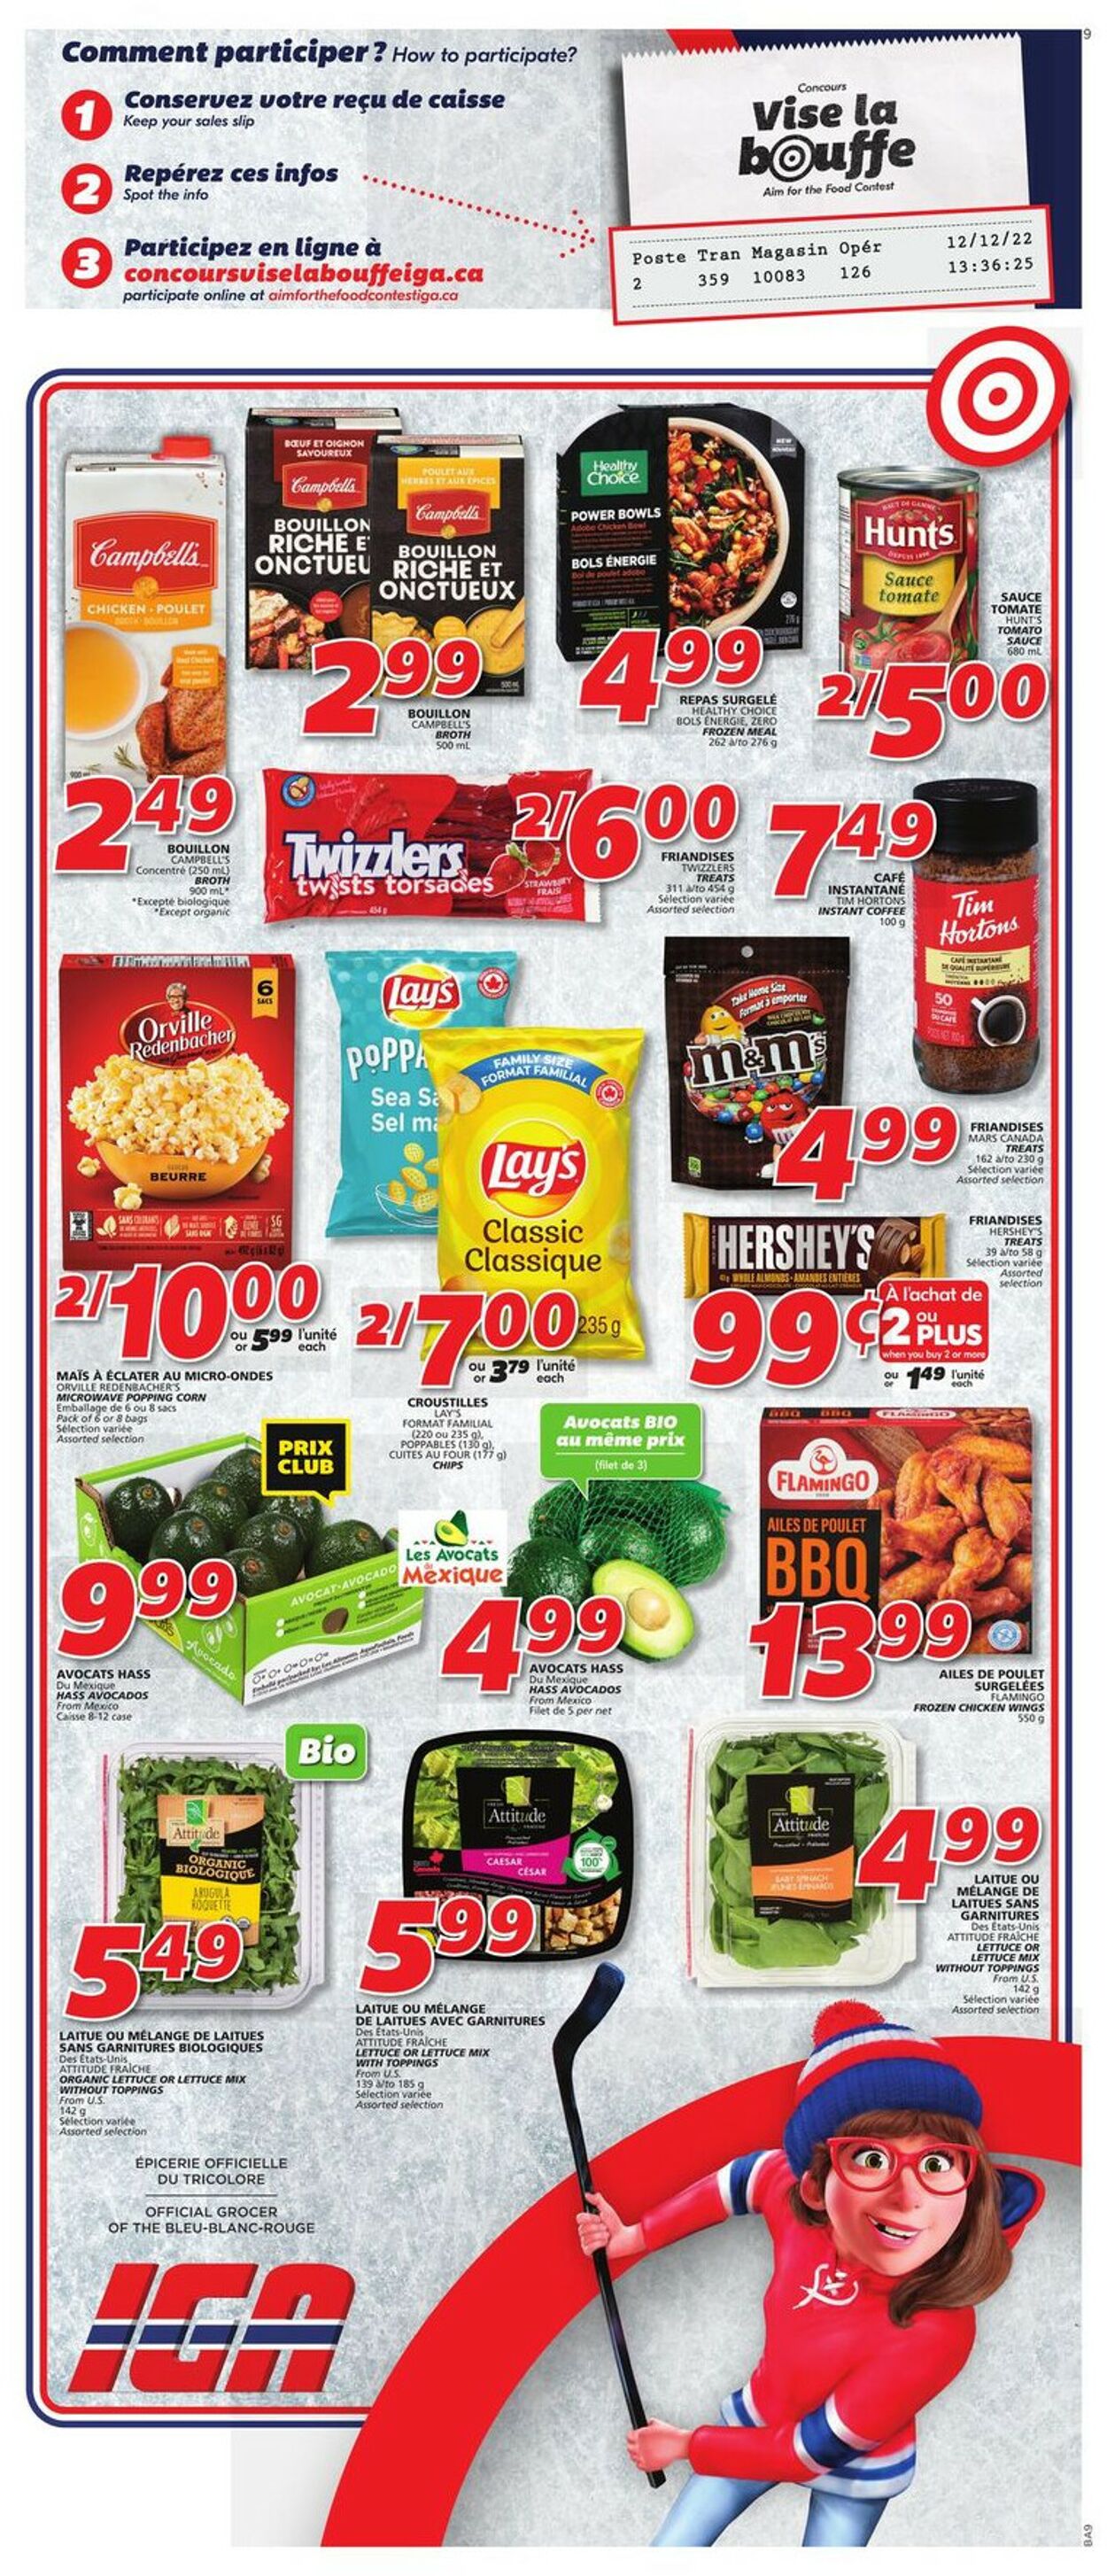 IGA Flyer from 10/20/2022